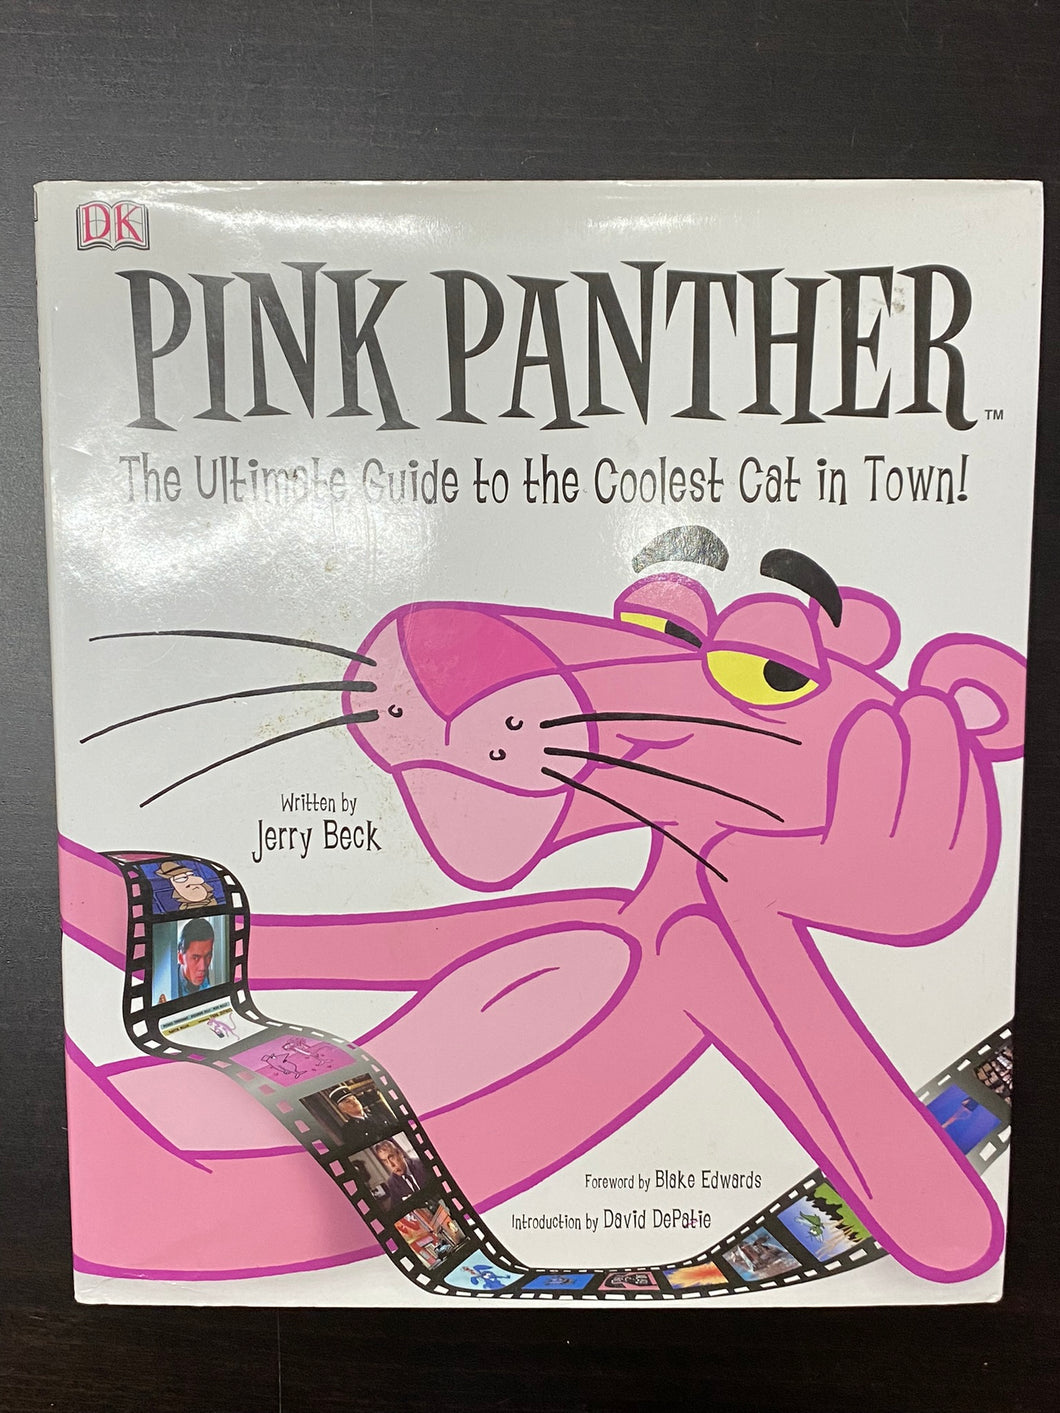 Pink Panther: The Ultimate Guide To The Coolest Cat In Town, by Jerry Beck